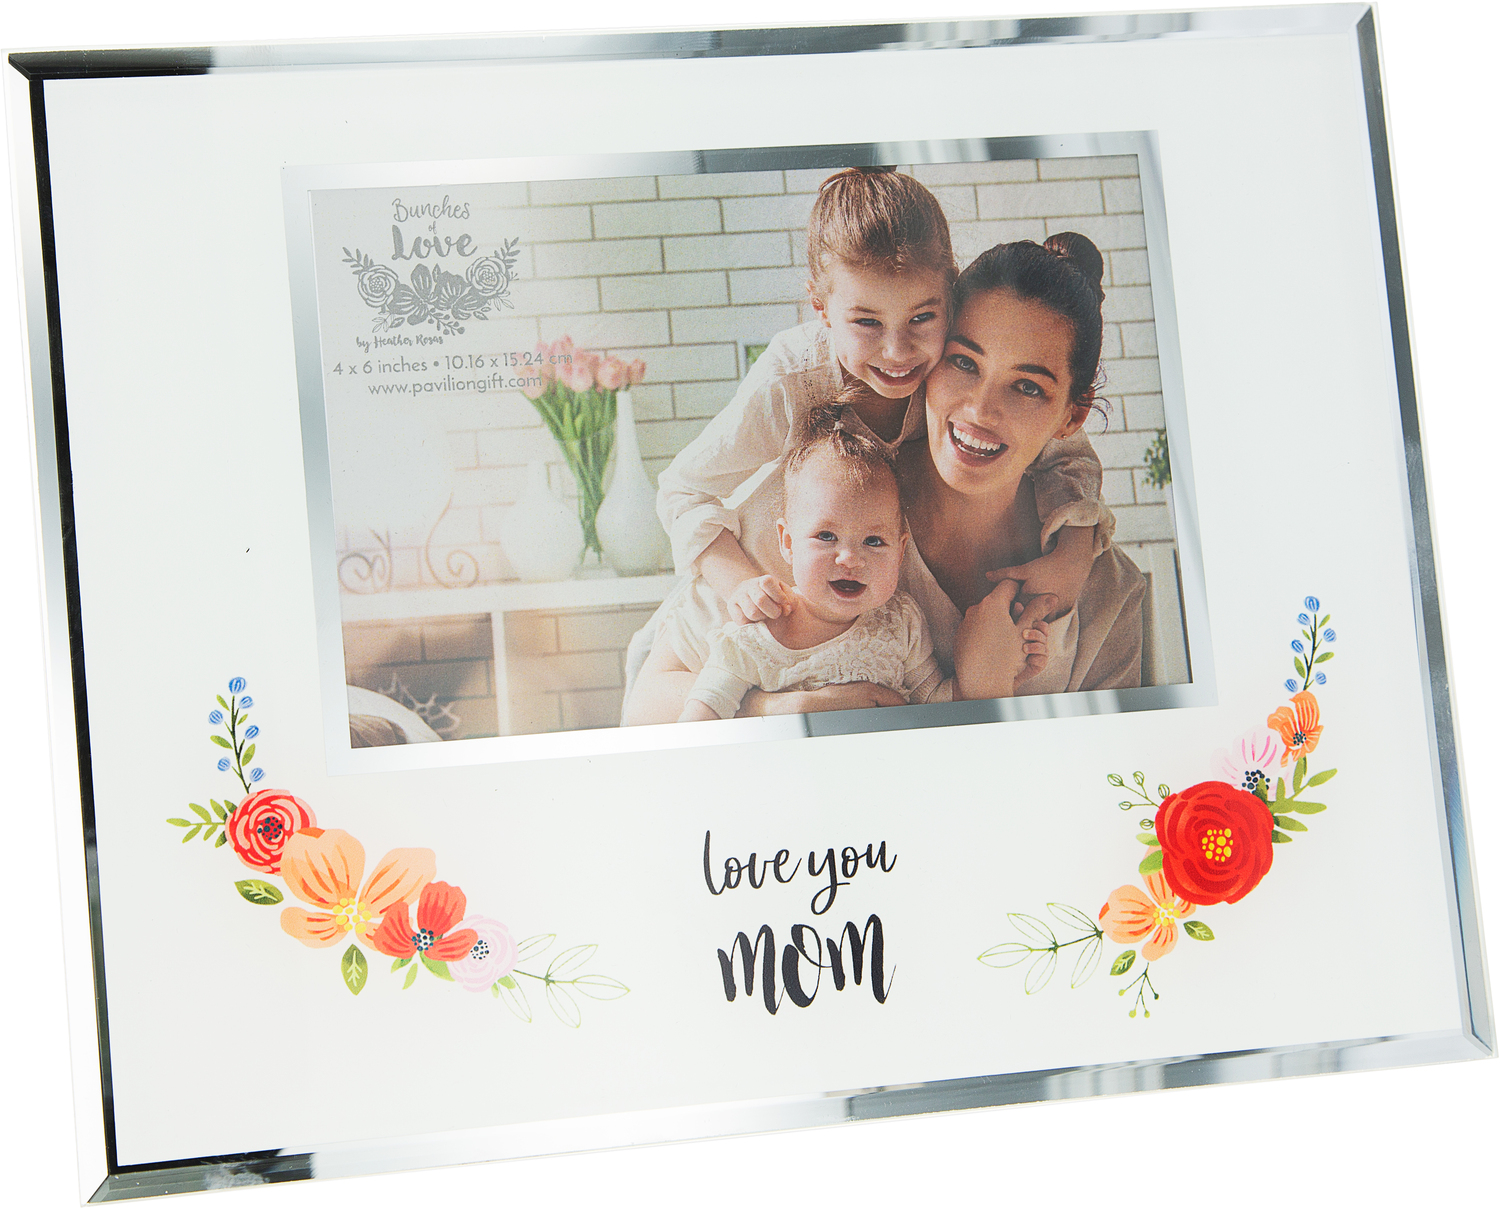 Mom by Bunches of Love - Mom - 9.25" x 7.25" Frame
(Holds 6" x 4" Photo)